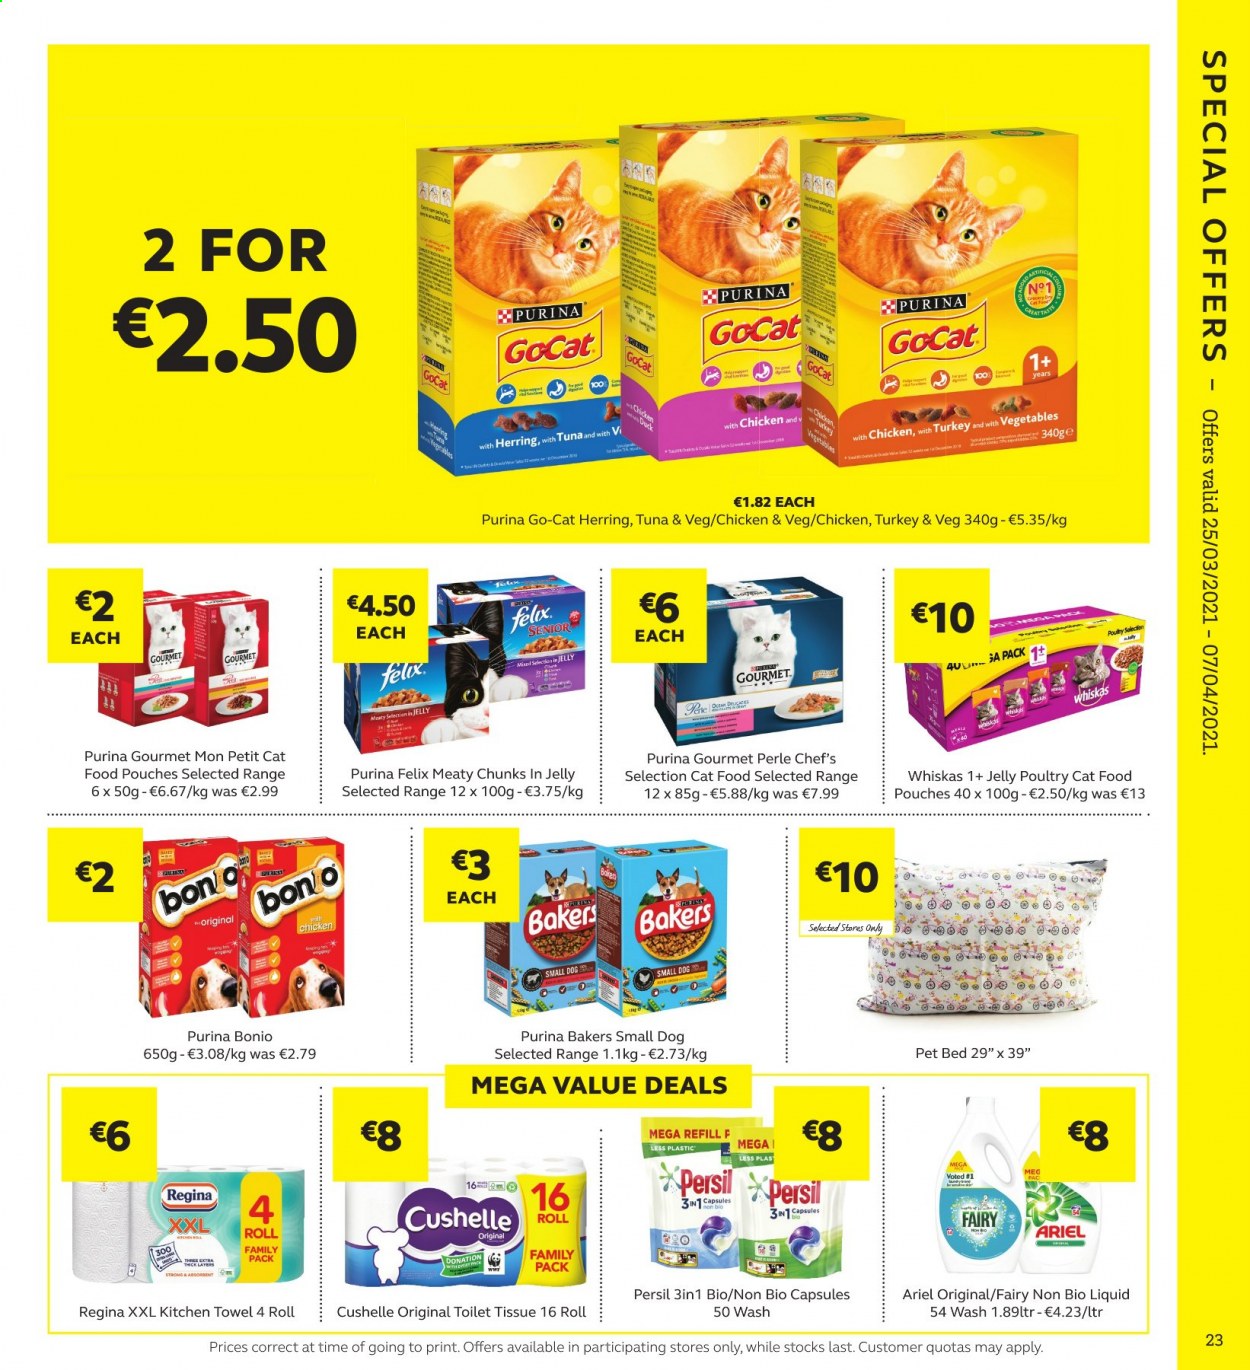 thumbnail - SuperValu offer  - 25.03.2021 - 07.04.2021 - Sales products - tuna, jelly, toilet paper, tissues, kitchen towels, Fairy, Persil, Ariel, pet bed, animal food, cat food, Purina, Whiskas, Go-Cat, Felix, Bakers. Page 23.